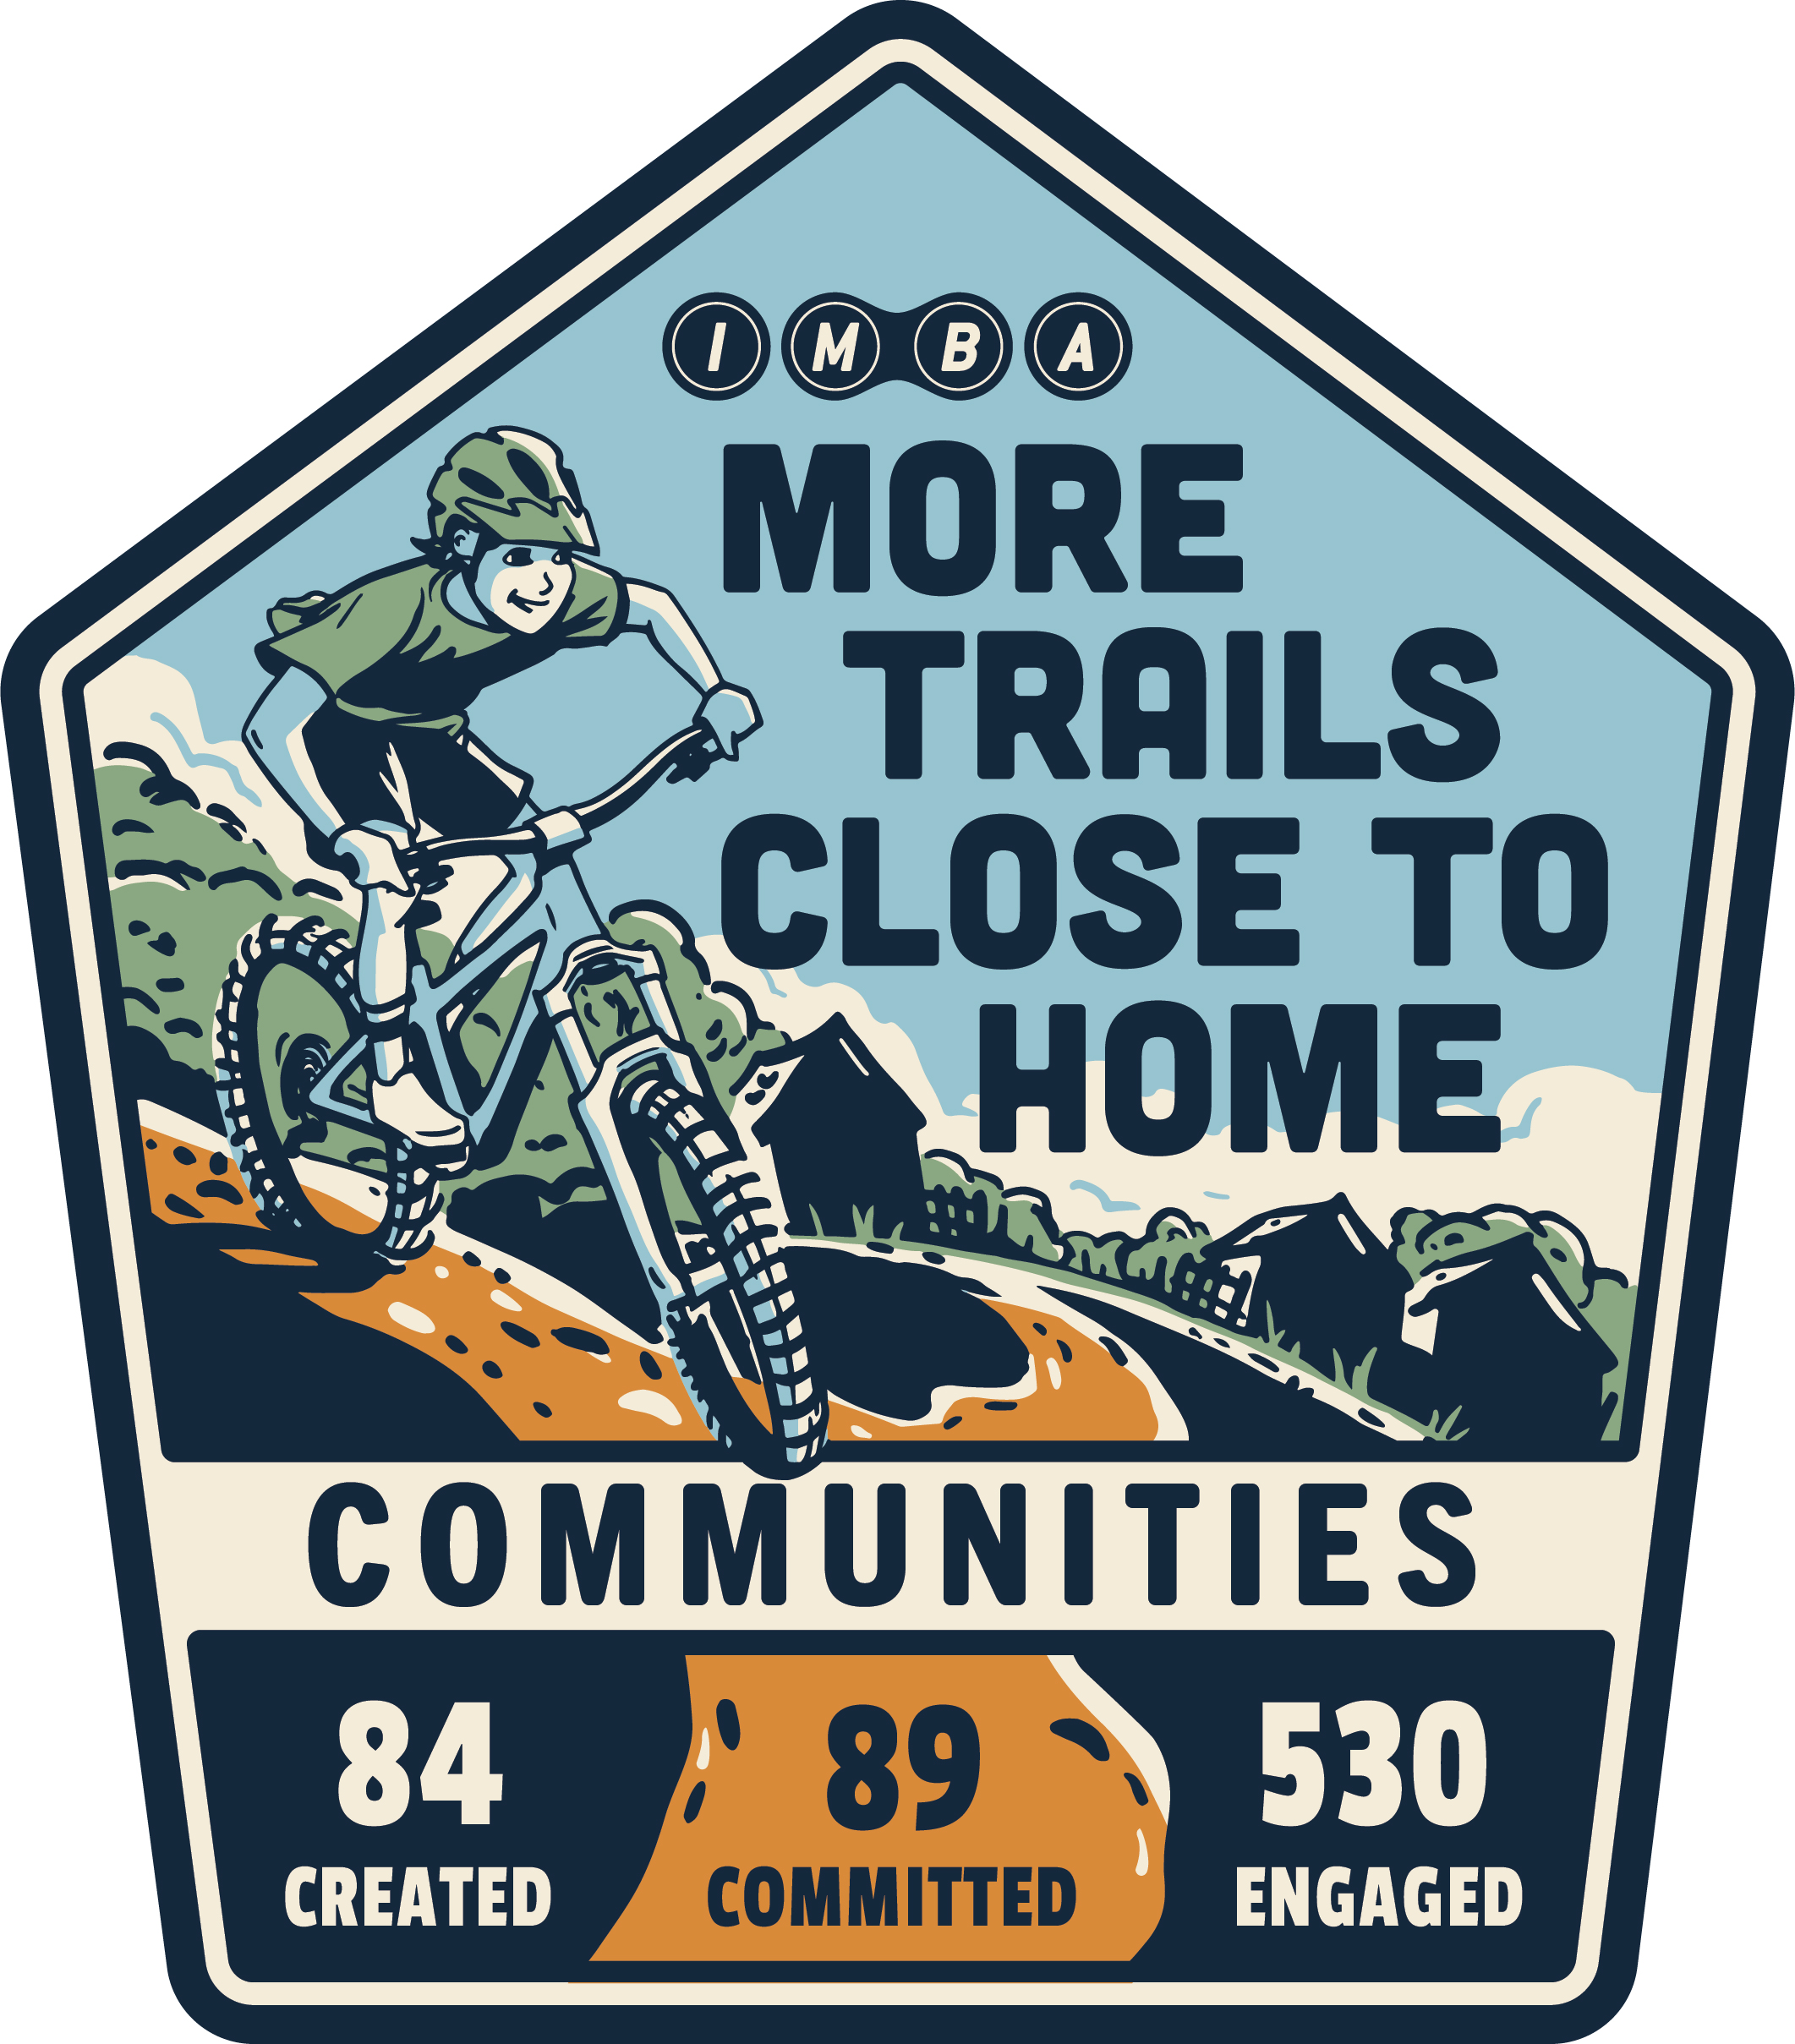 A badge for More Trails Close to Home shows the image of a mountain biker on a trail and notes 84 communities where trails have been created, 89 have committed, and 530 have engaged in the process.